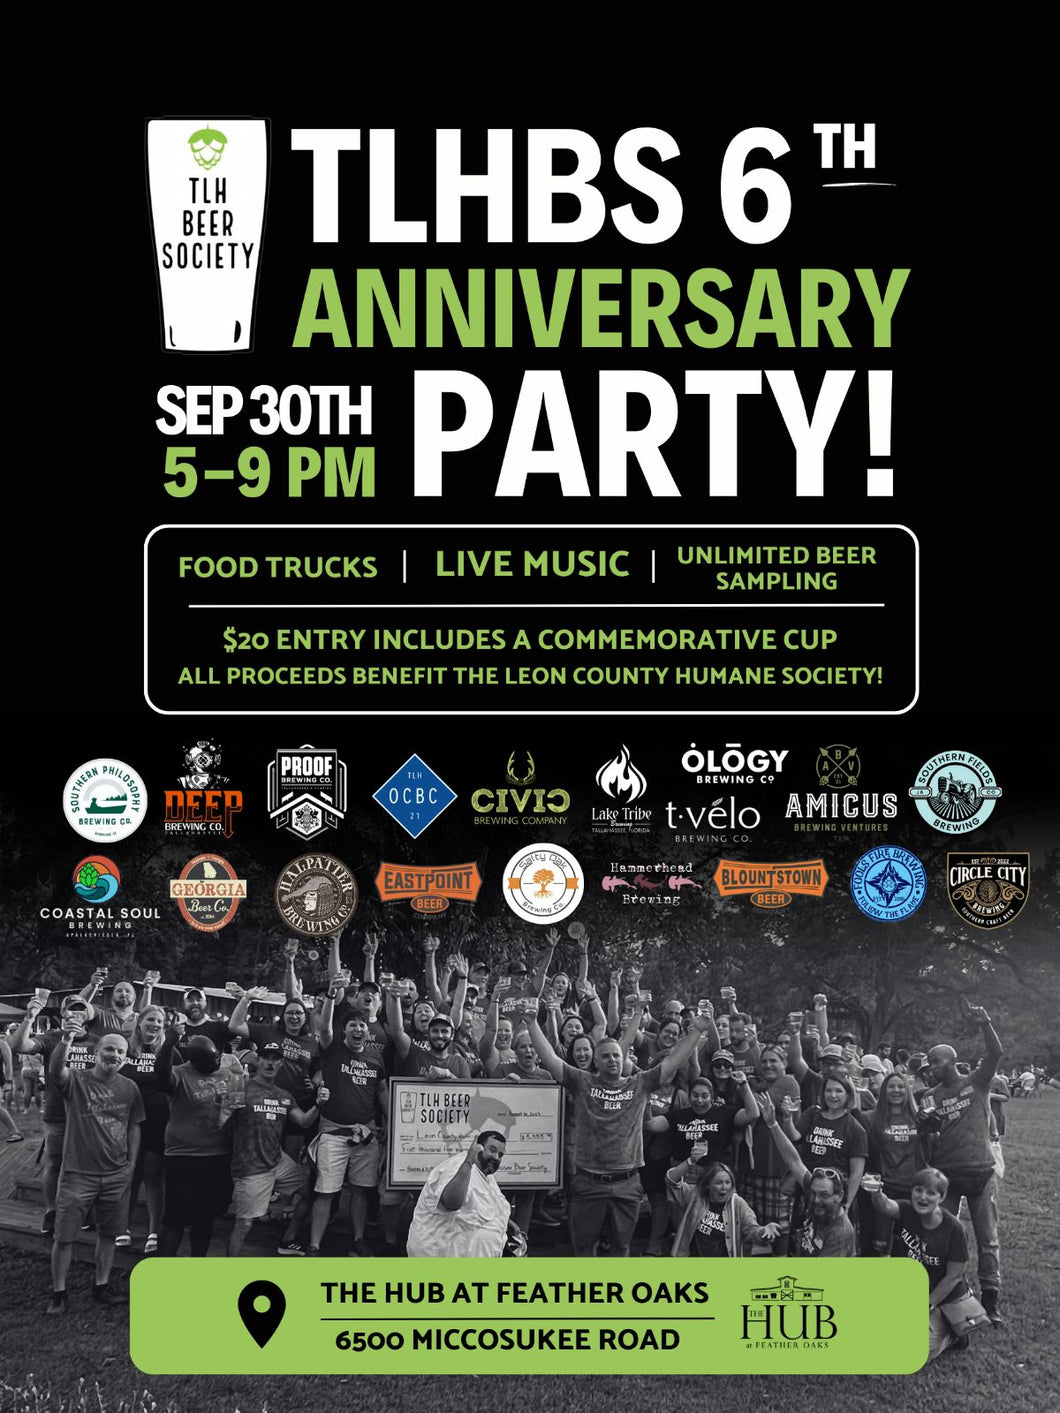 Tallahassee Beer Society 6th Anniversary Party Tickets